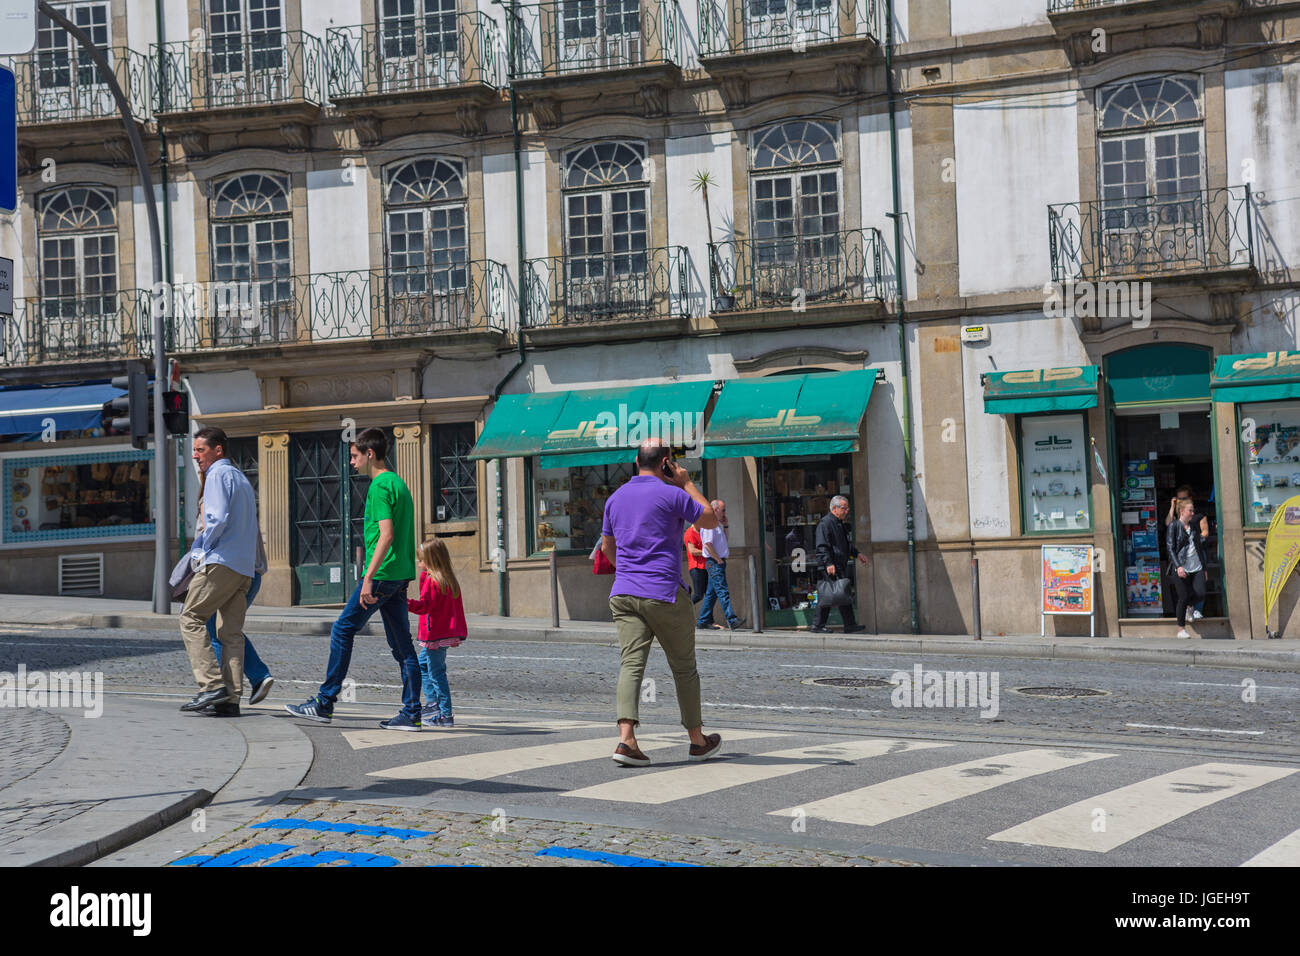 PORTO, PORTUGAL - April 17, 2017: People walking at Old Town street of Porto. Porto is the famous tourist destiantion in Portugal Stock Photo